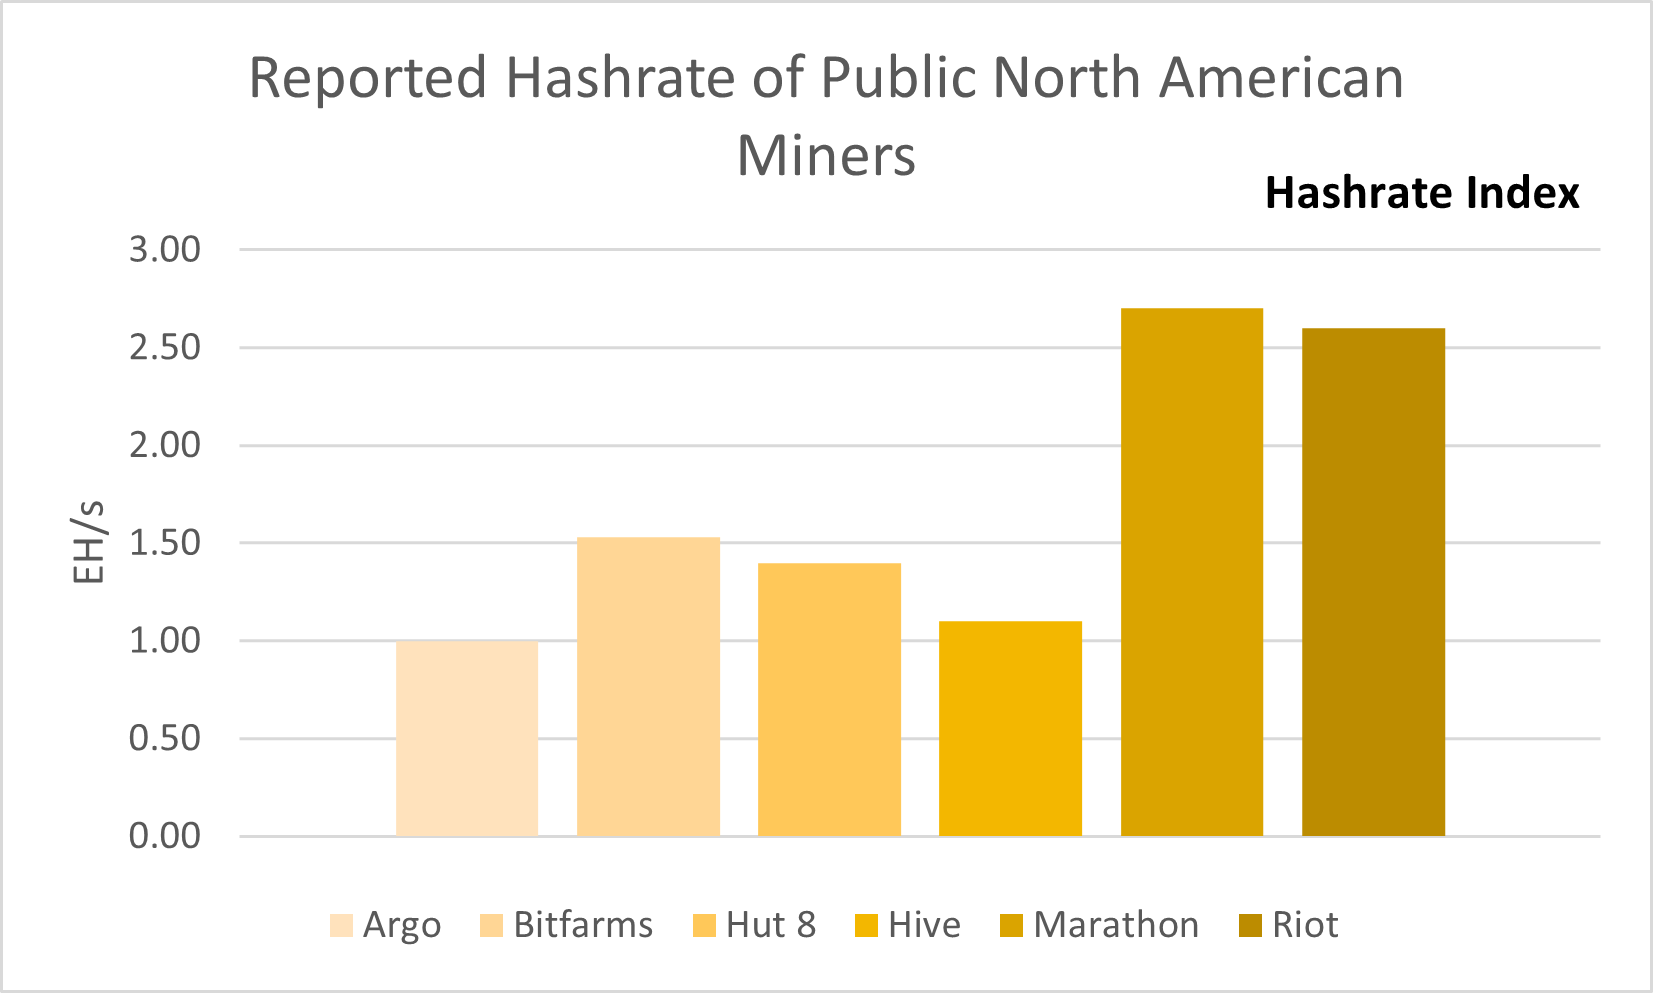 North American Public Miner reported hashrate based on latest available numbers. Source: Public Mining company press releases and financial statements